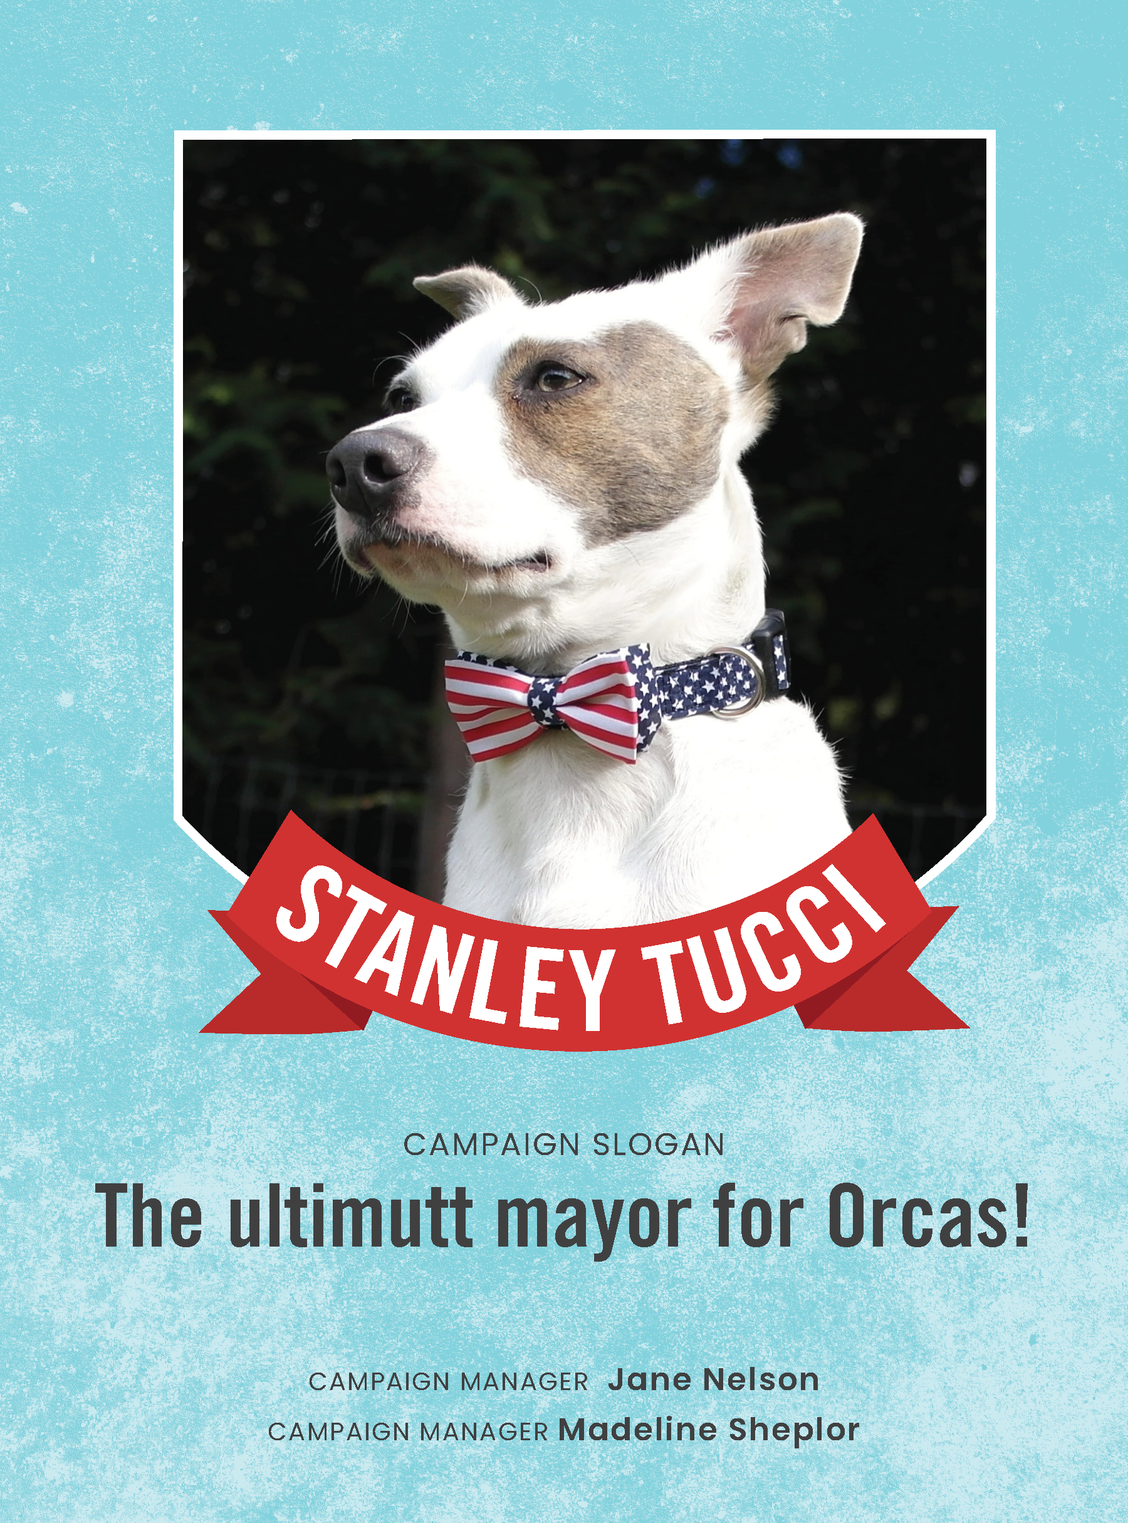 Vote for Stanley Tucci!